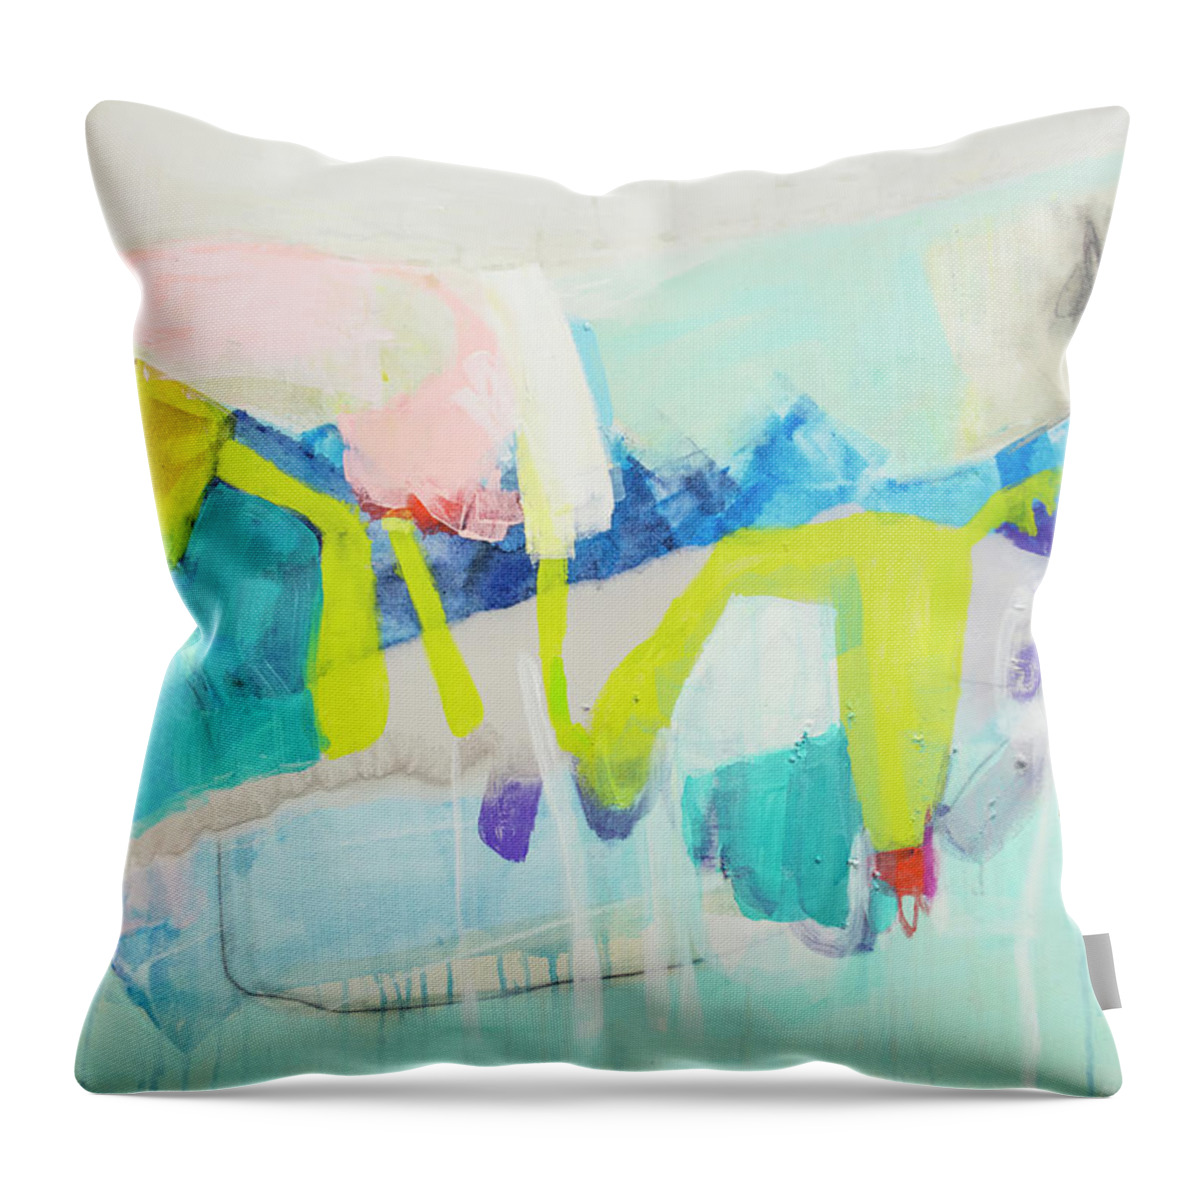 Abstract Throw Pillow featuring the painting Whatever Makes You Happy by Claire Desjardins